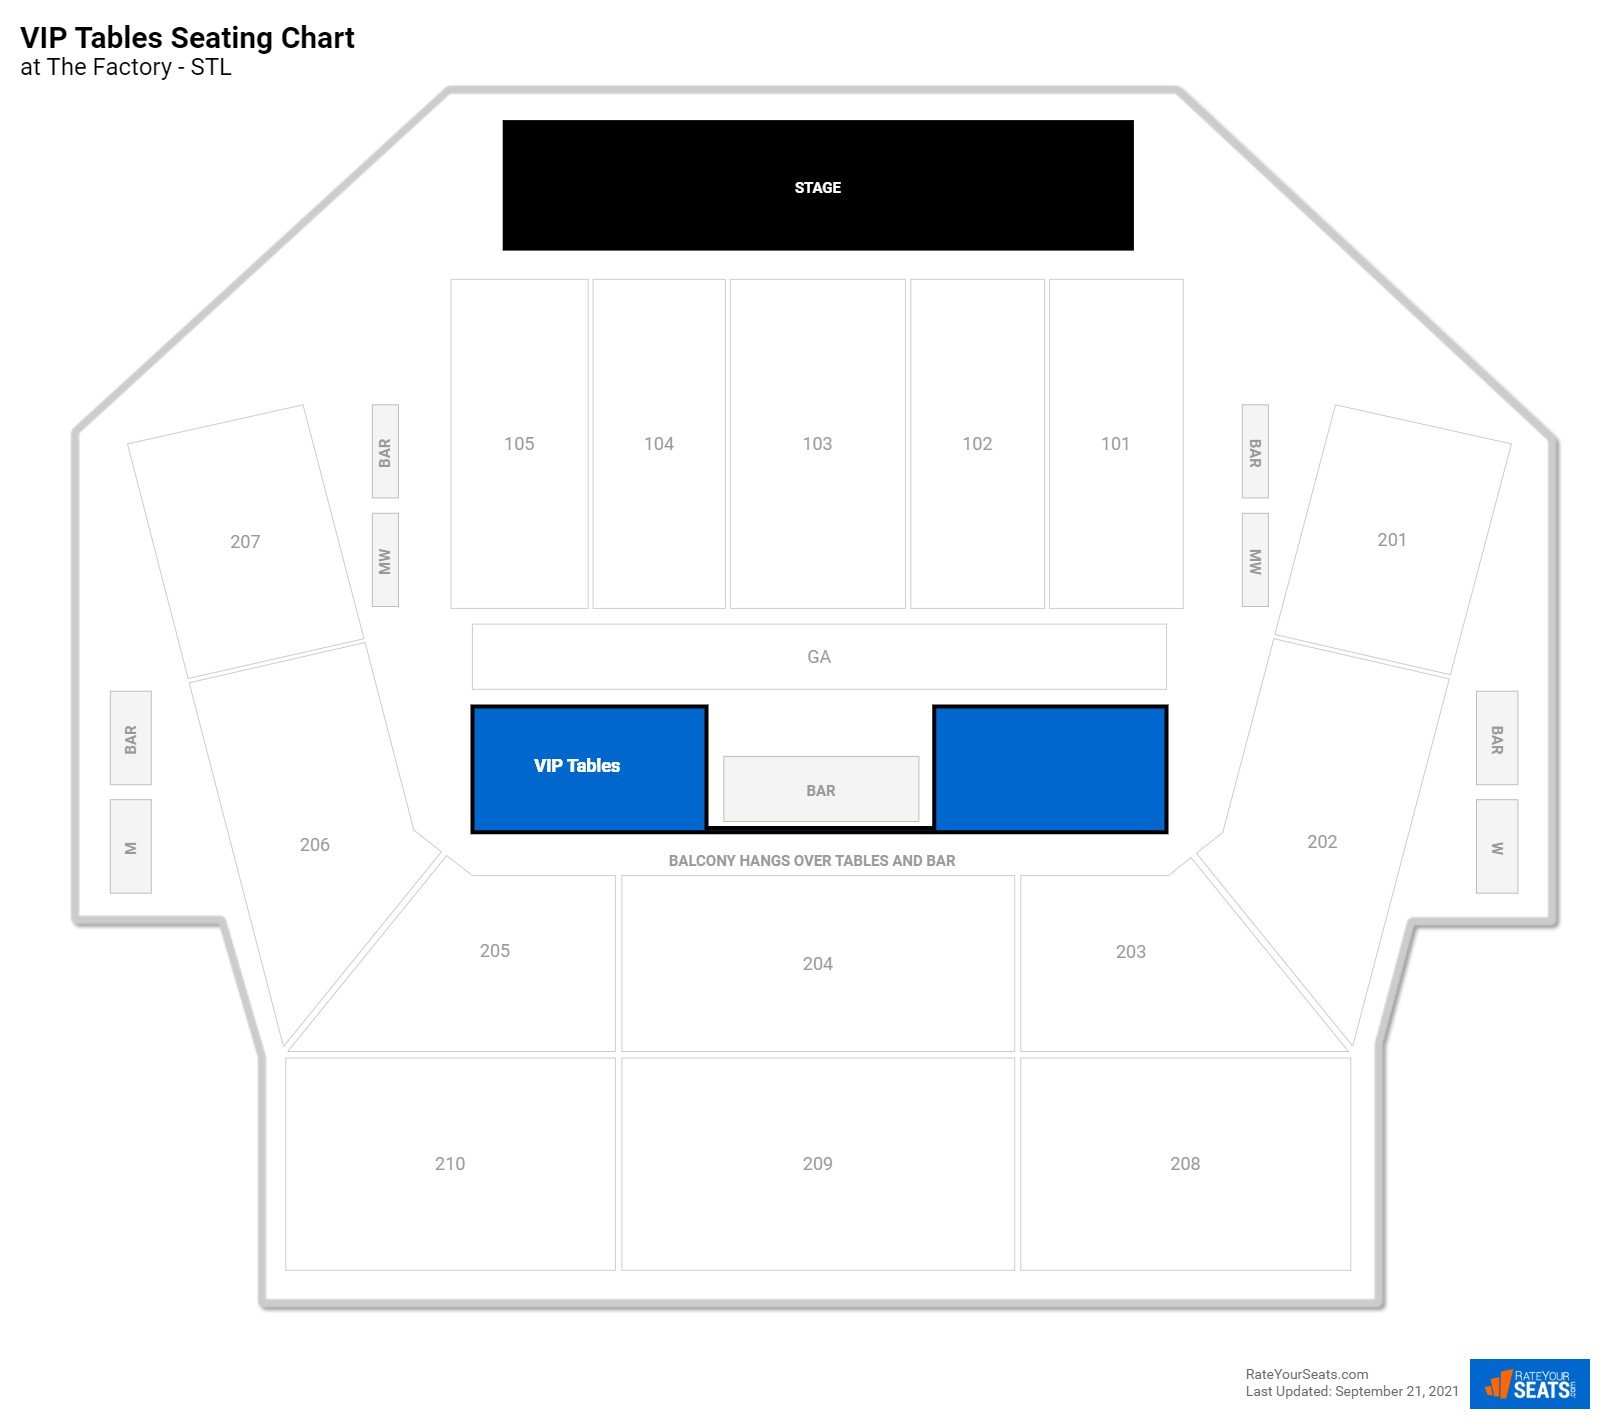 Concert VIP Tables Seating Chart at The Factory - STL